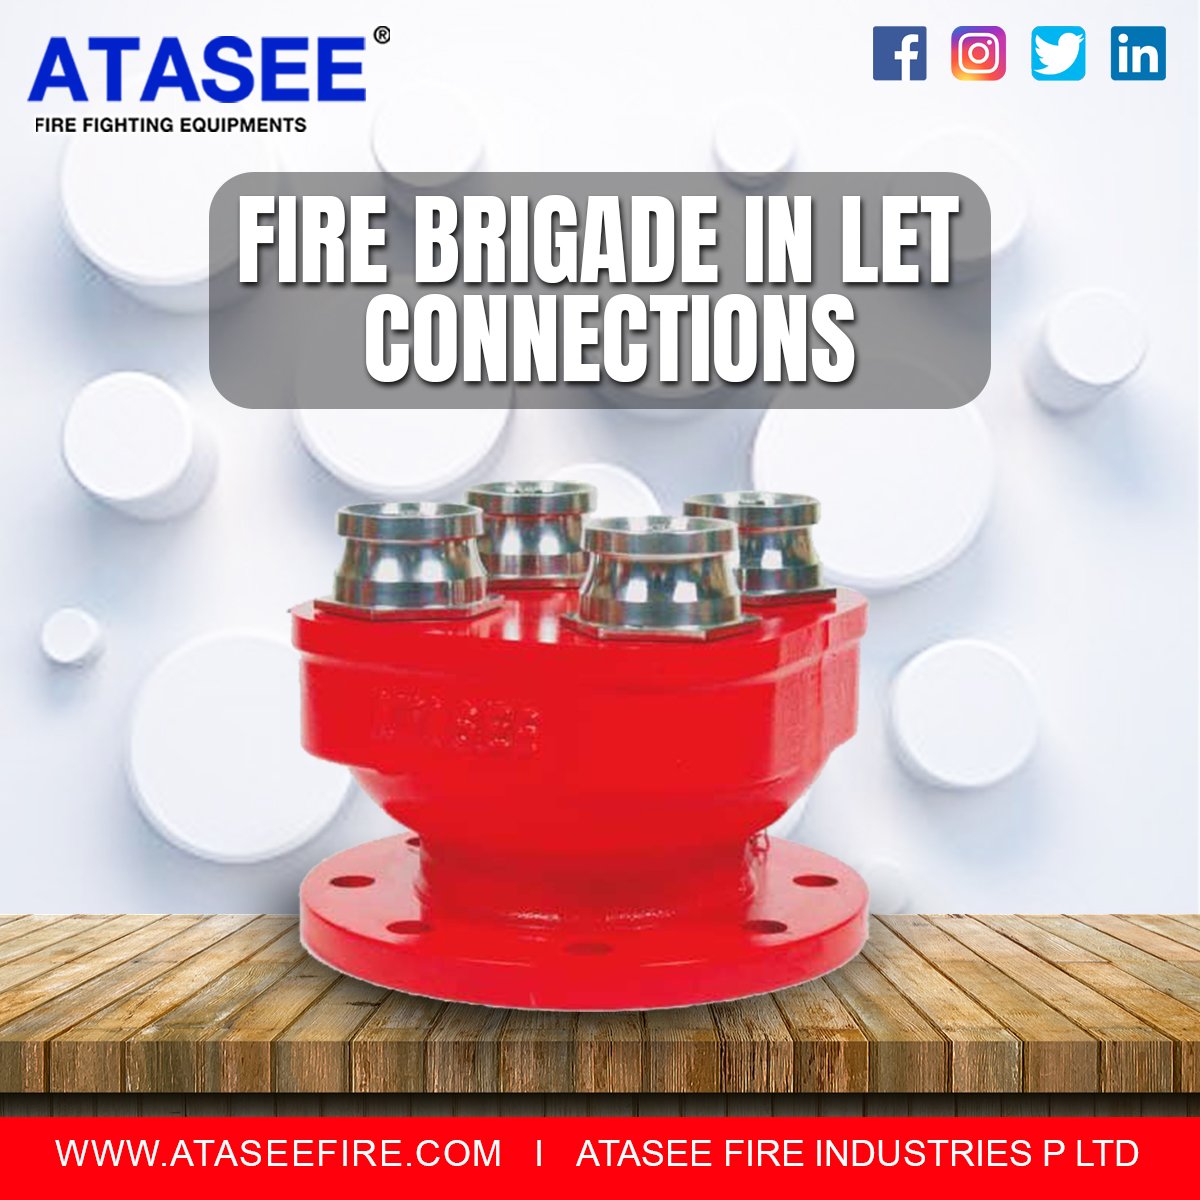 The inlet is used by the brigade personnel to access water. It is normally dry but is used to pump water by charging using fire fighting equipment.

#firesafety #FireSafetyTips #FireSafetyTips #firesafetytraining #firesafetyawareness #firesafetyequipment #safetyfirst